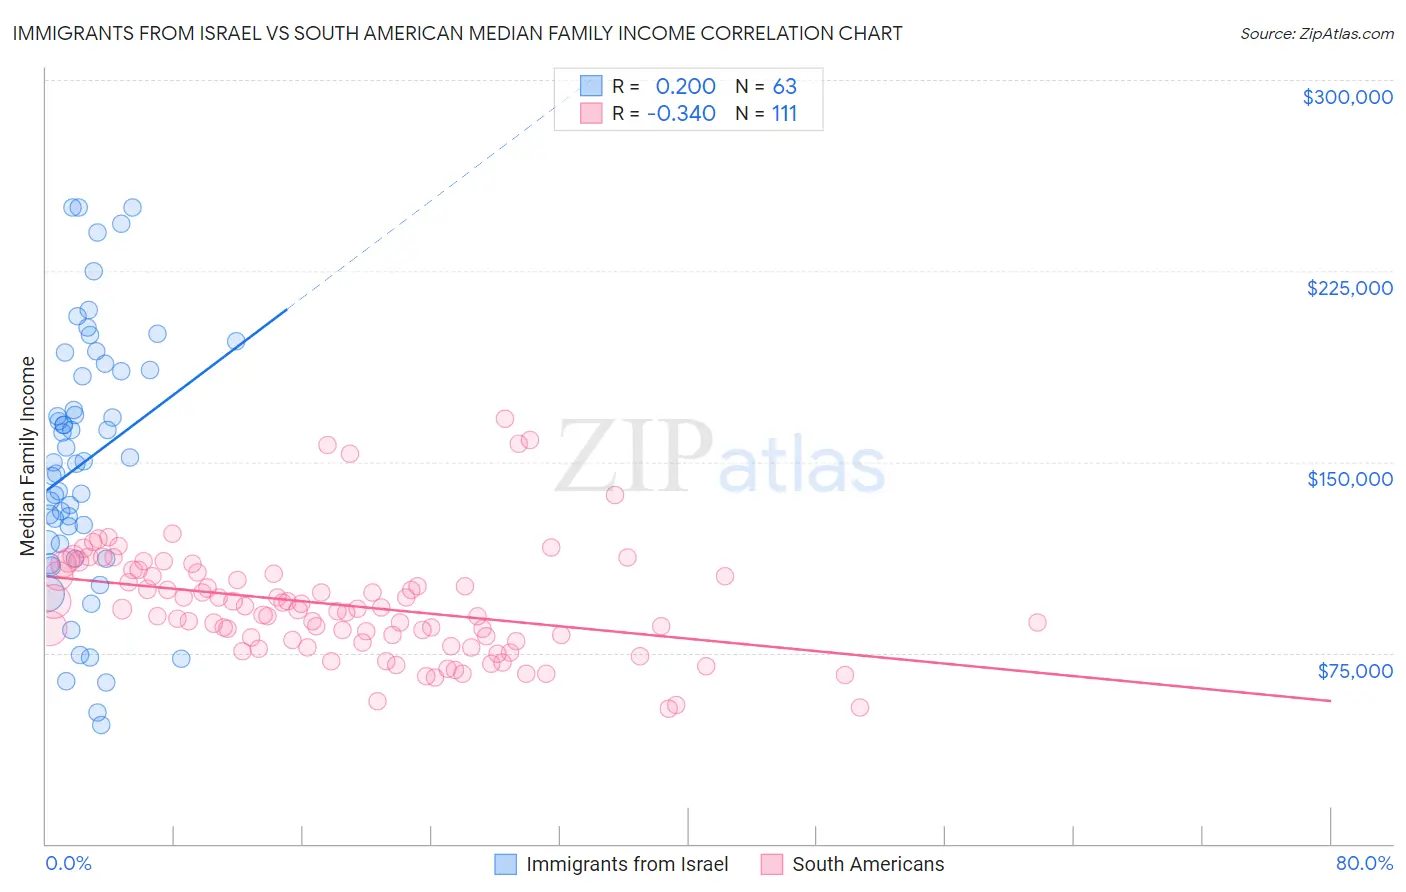 Immigrants from Israel vs South American Median Family Income